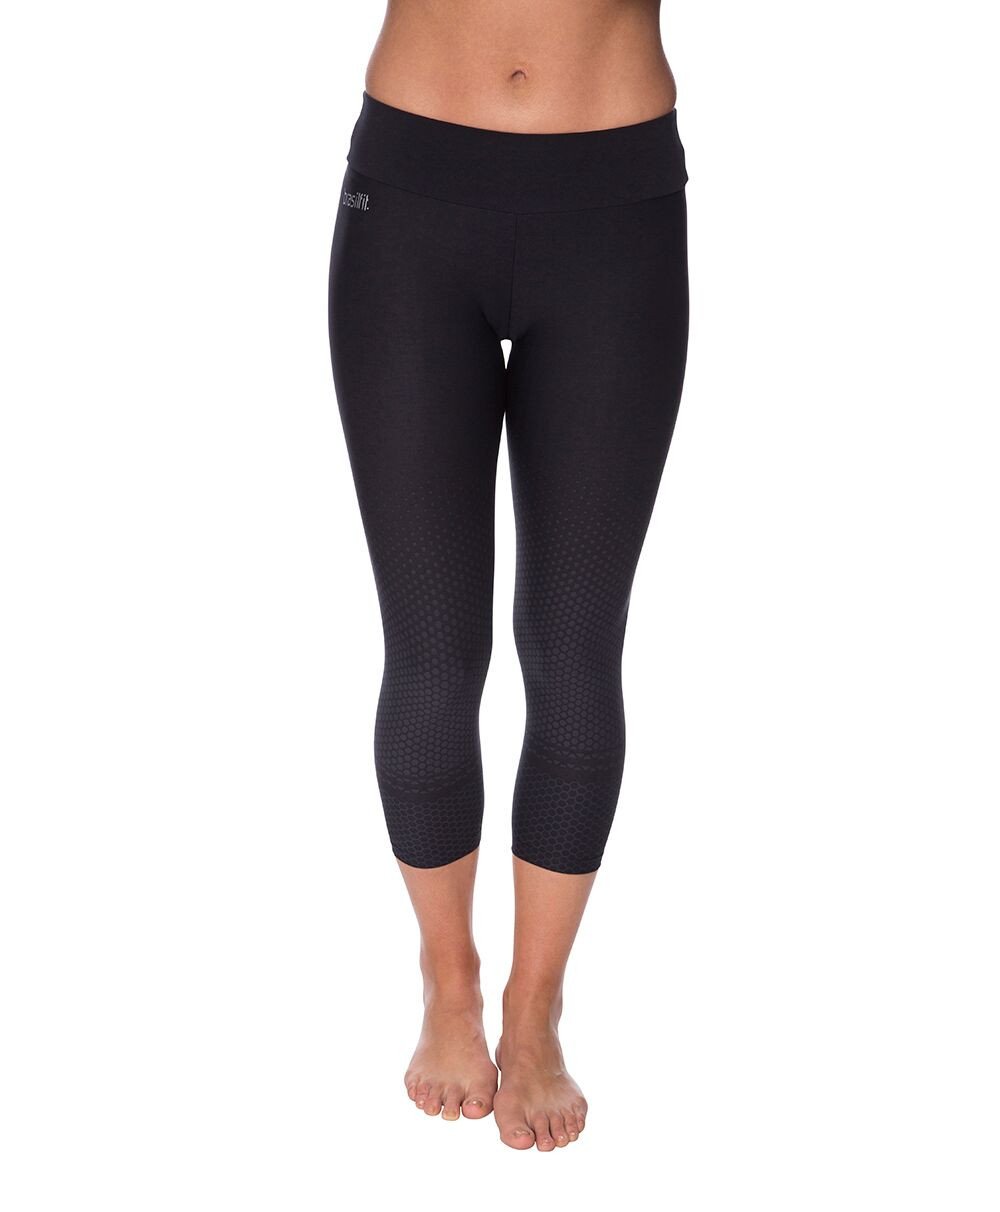 Side view product image for Brasilfit Quebec Calf Length activewear leggings.  Quebec leggings are part of our textured activewear legging collection that is focused on performance, high compression activewear.